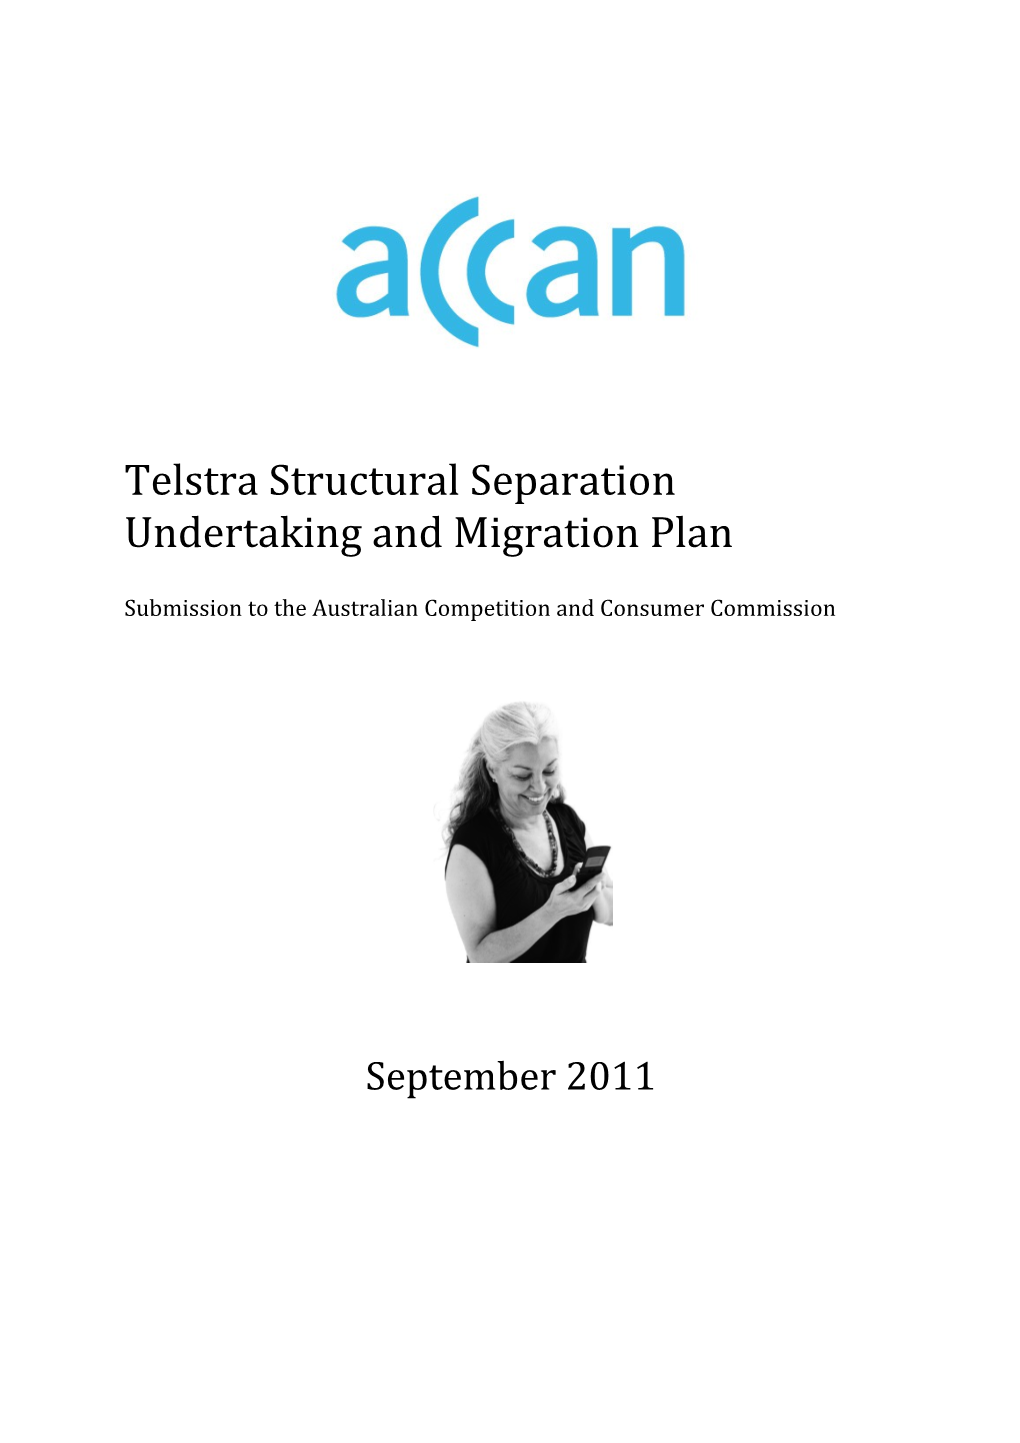 Telstra Structural Separation Undertaking and Migration Plan